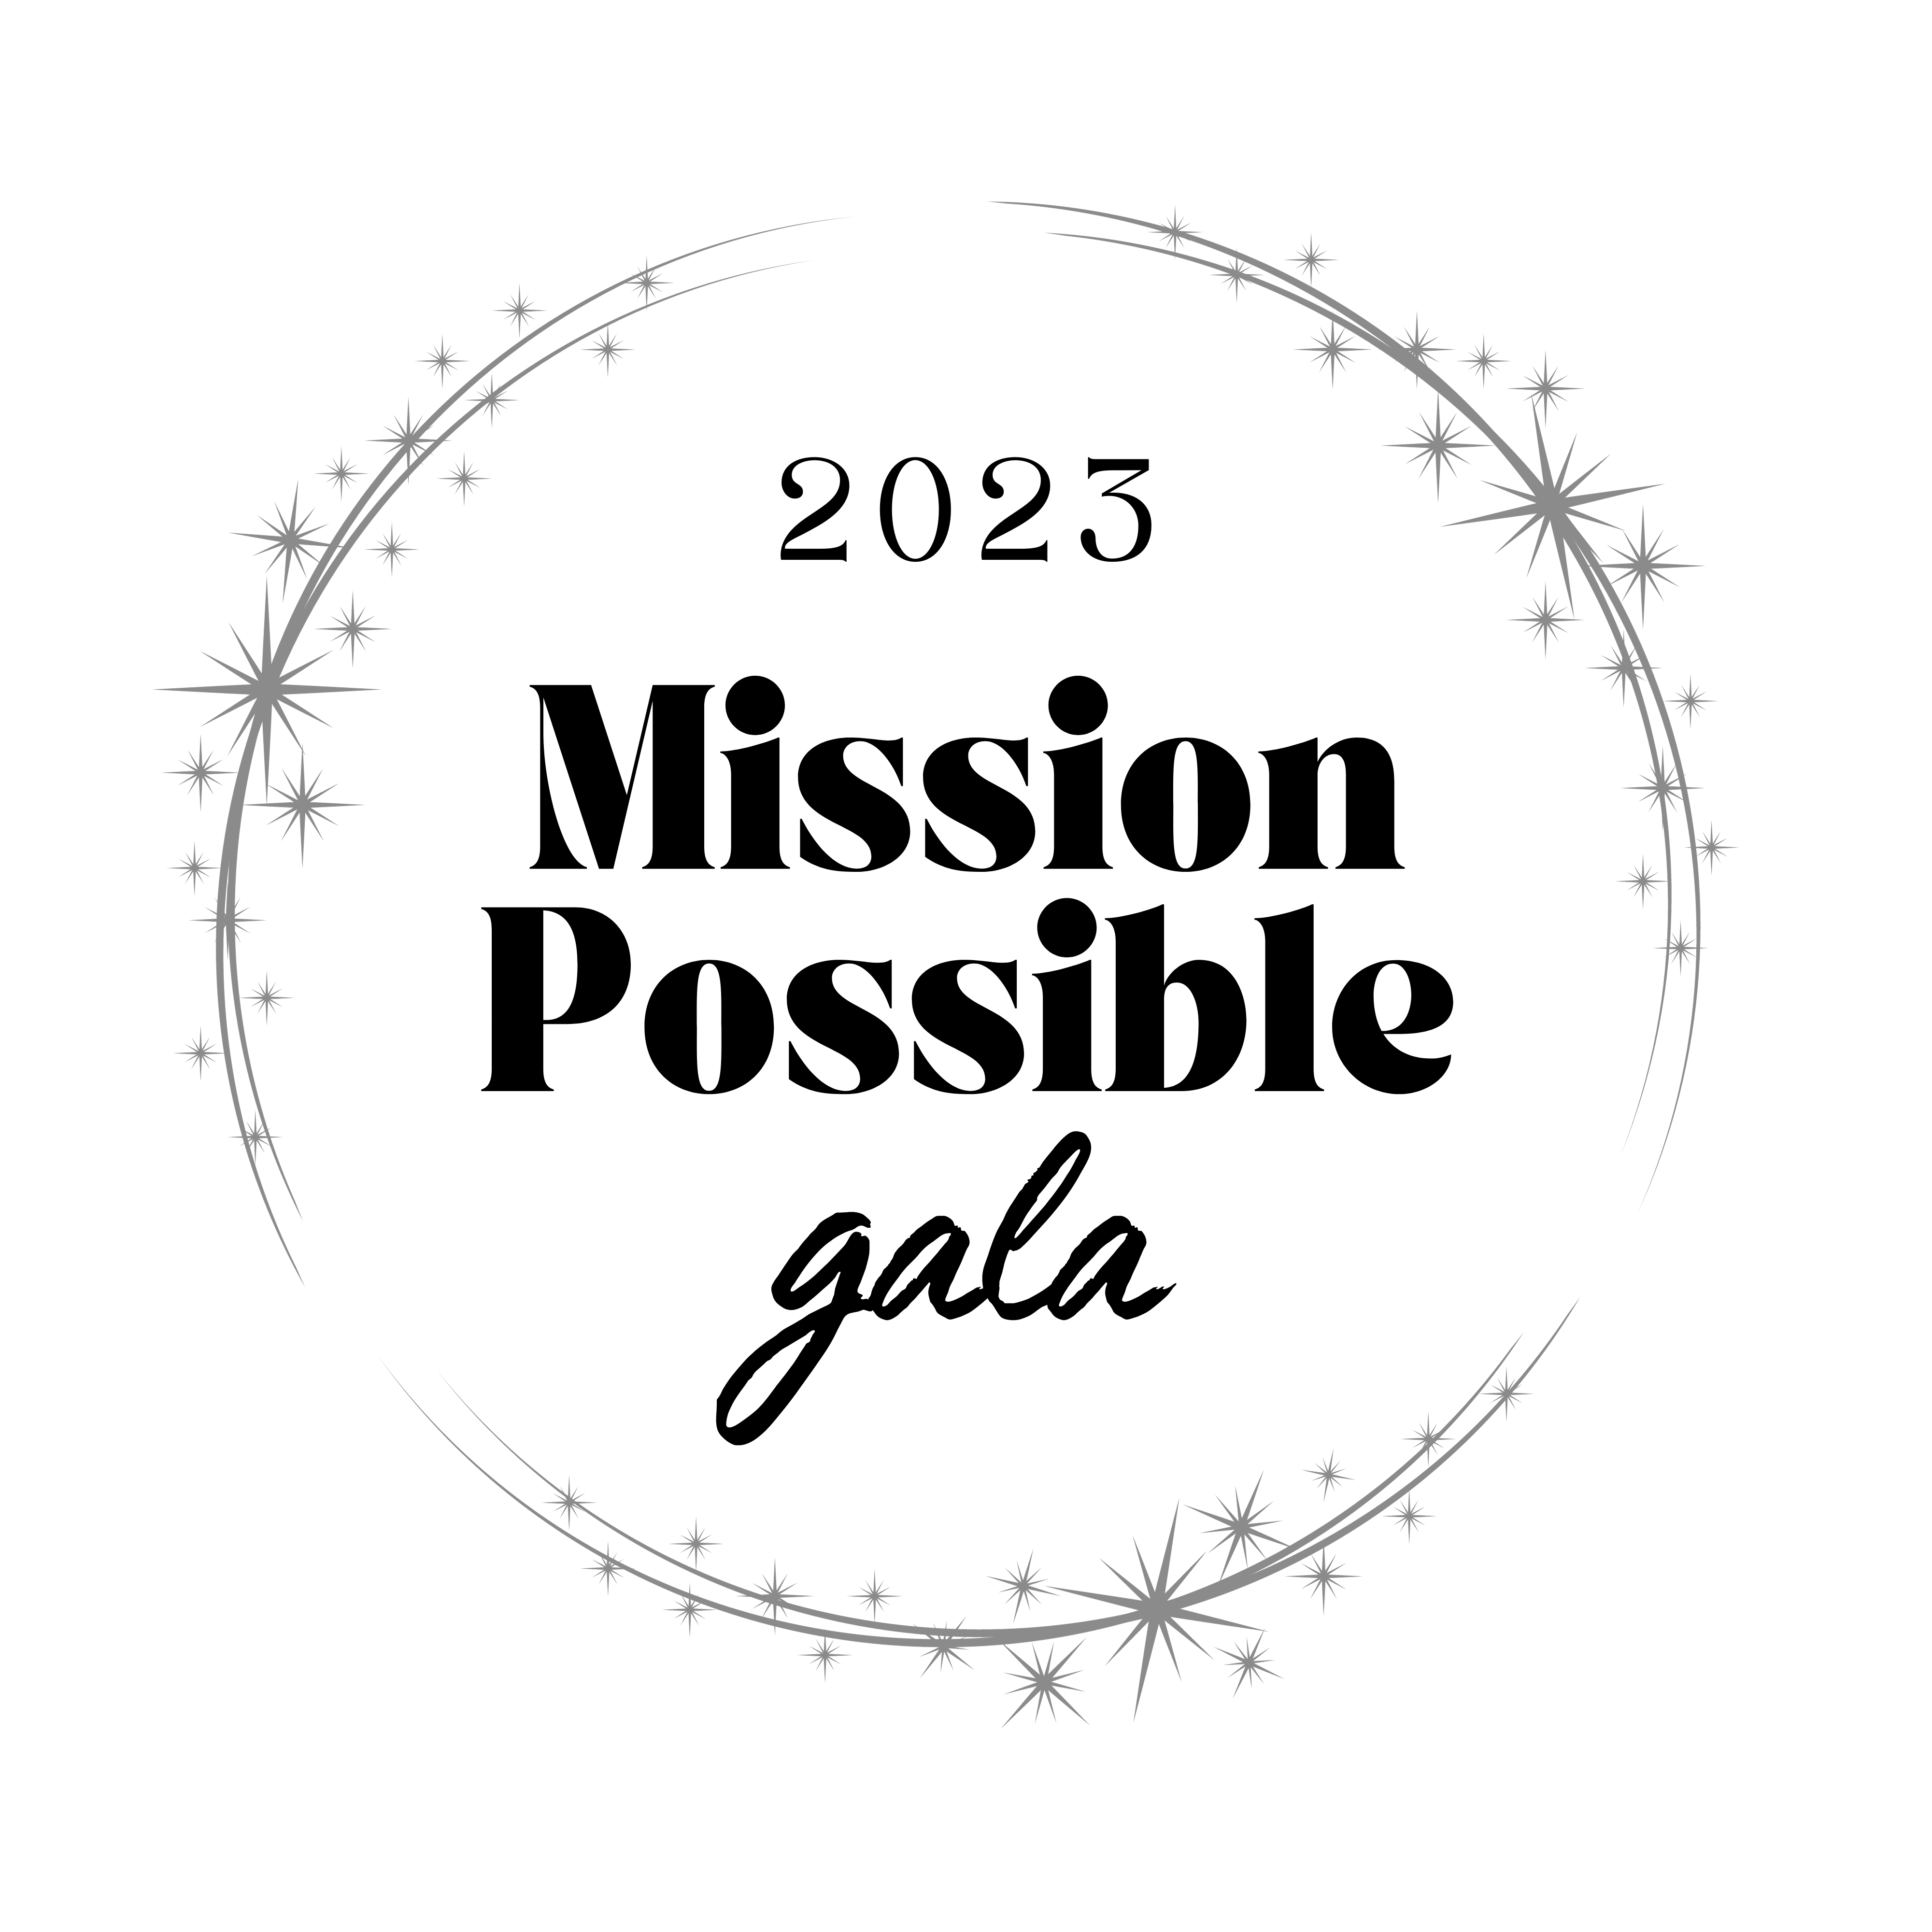 The 2023 Mission Possible Gala